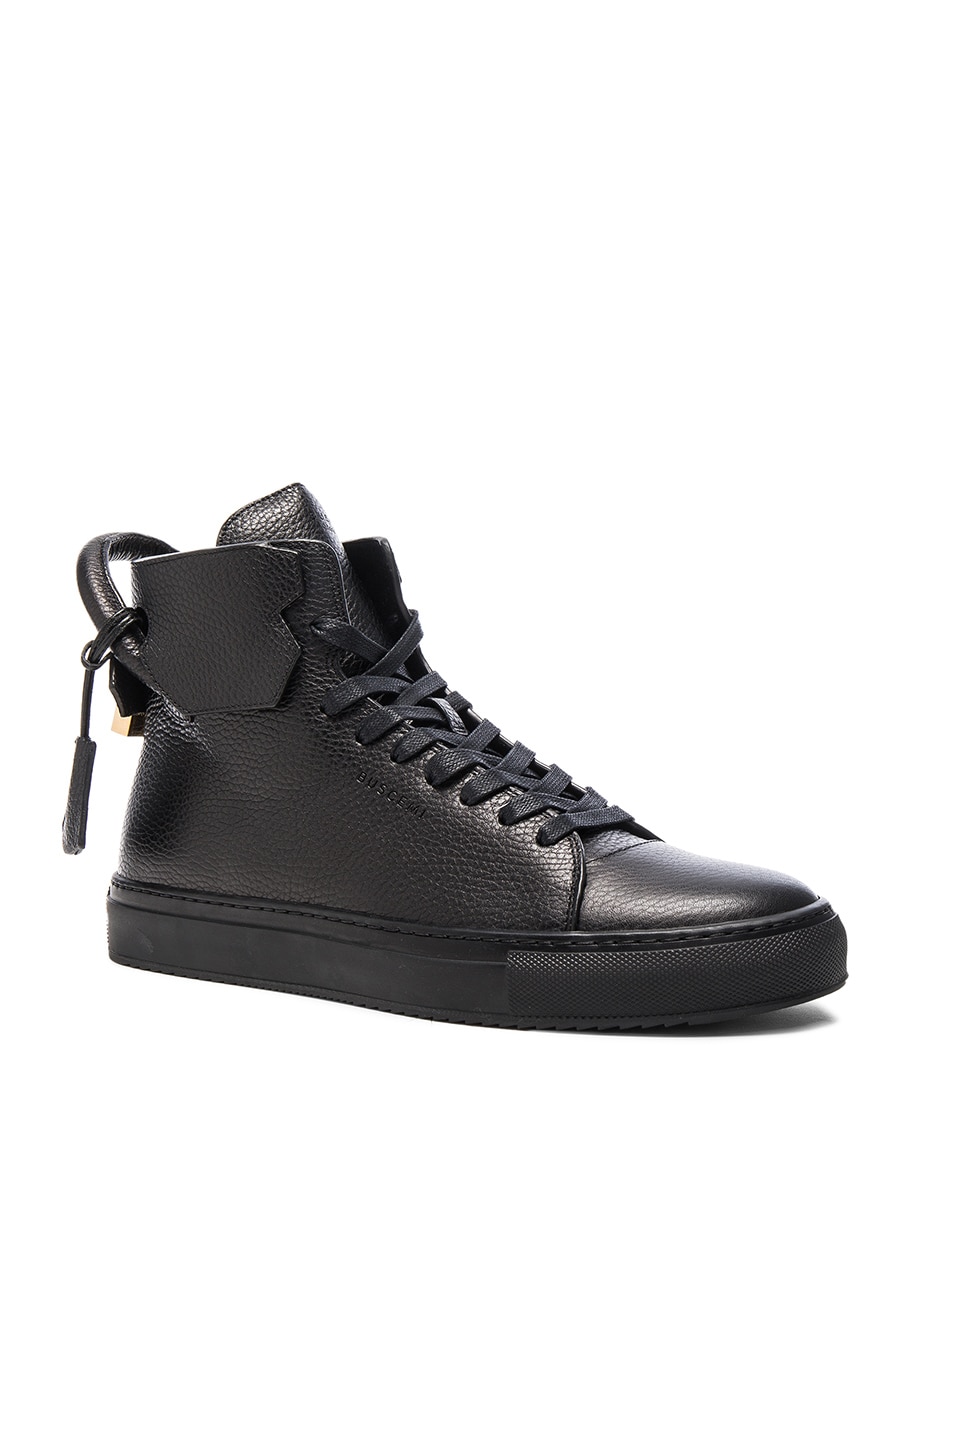 BUSCEMI 125Mm Leather Sneakers in Black | ModeSens